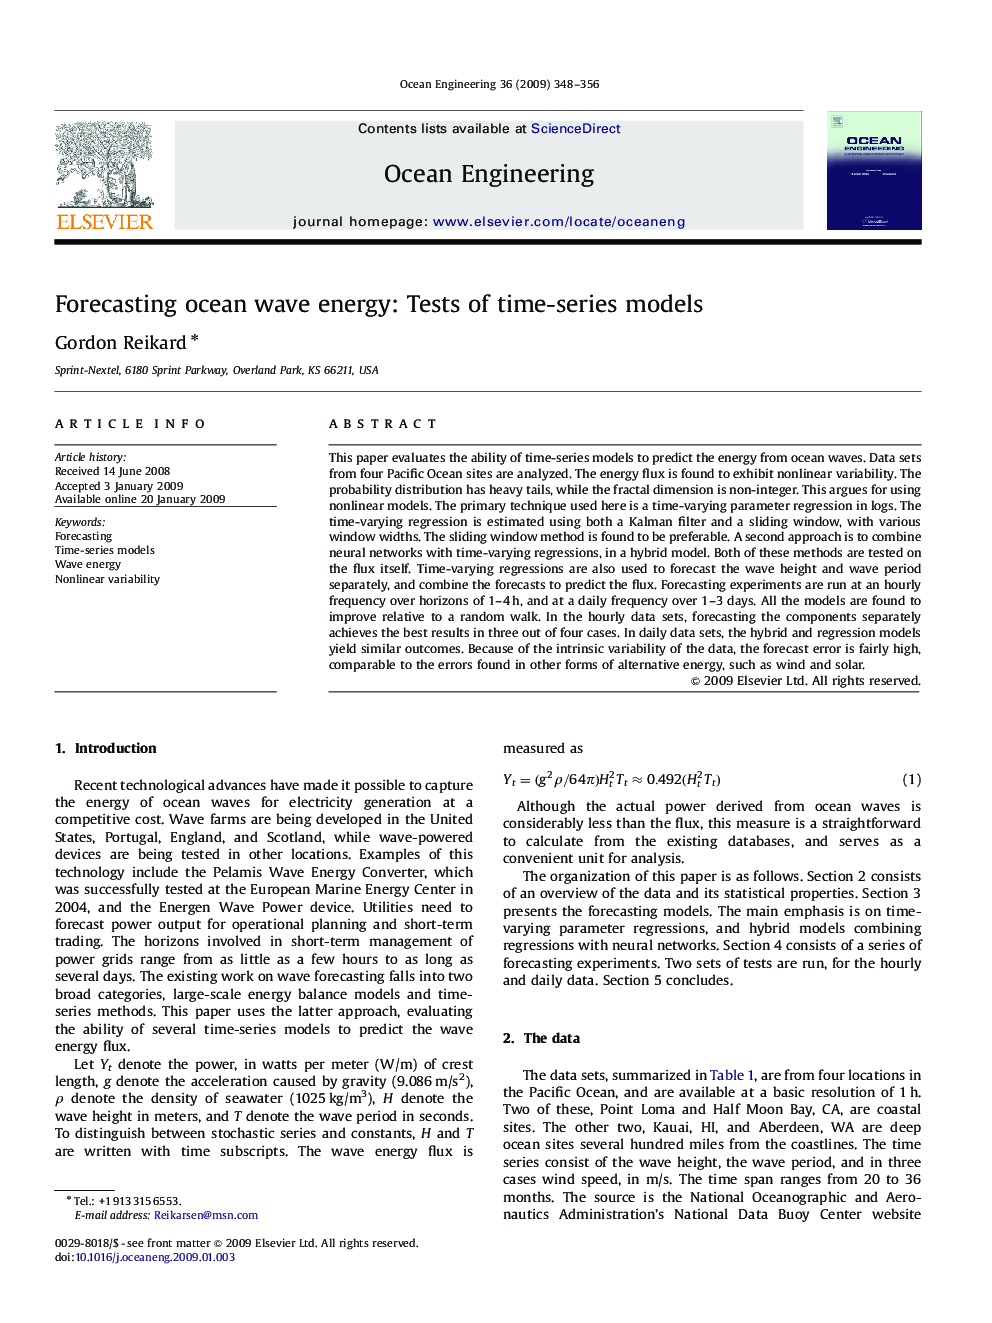 Forecasting ocean wave energy: Tests of time-series models